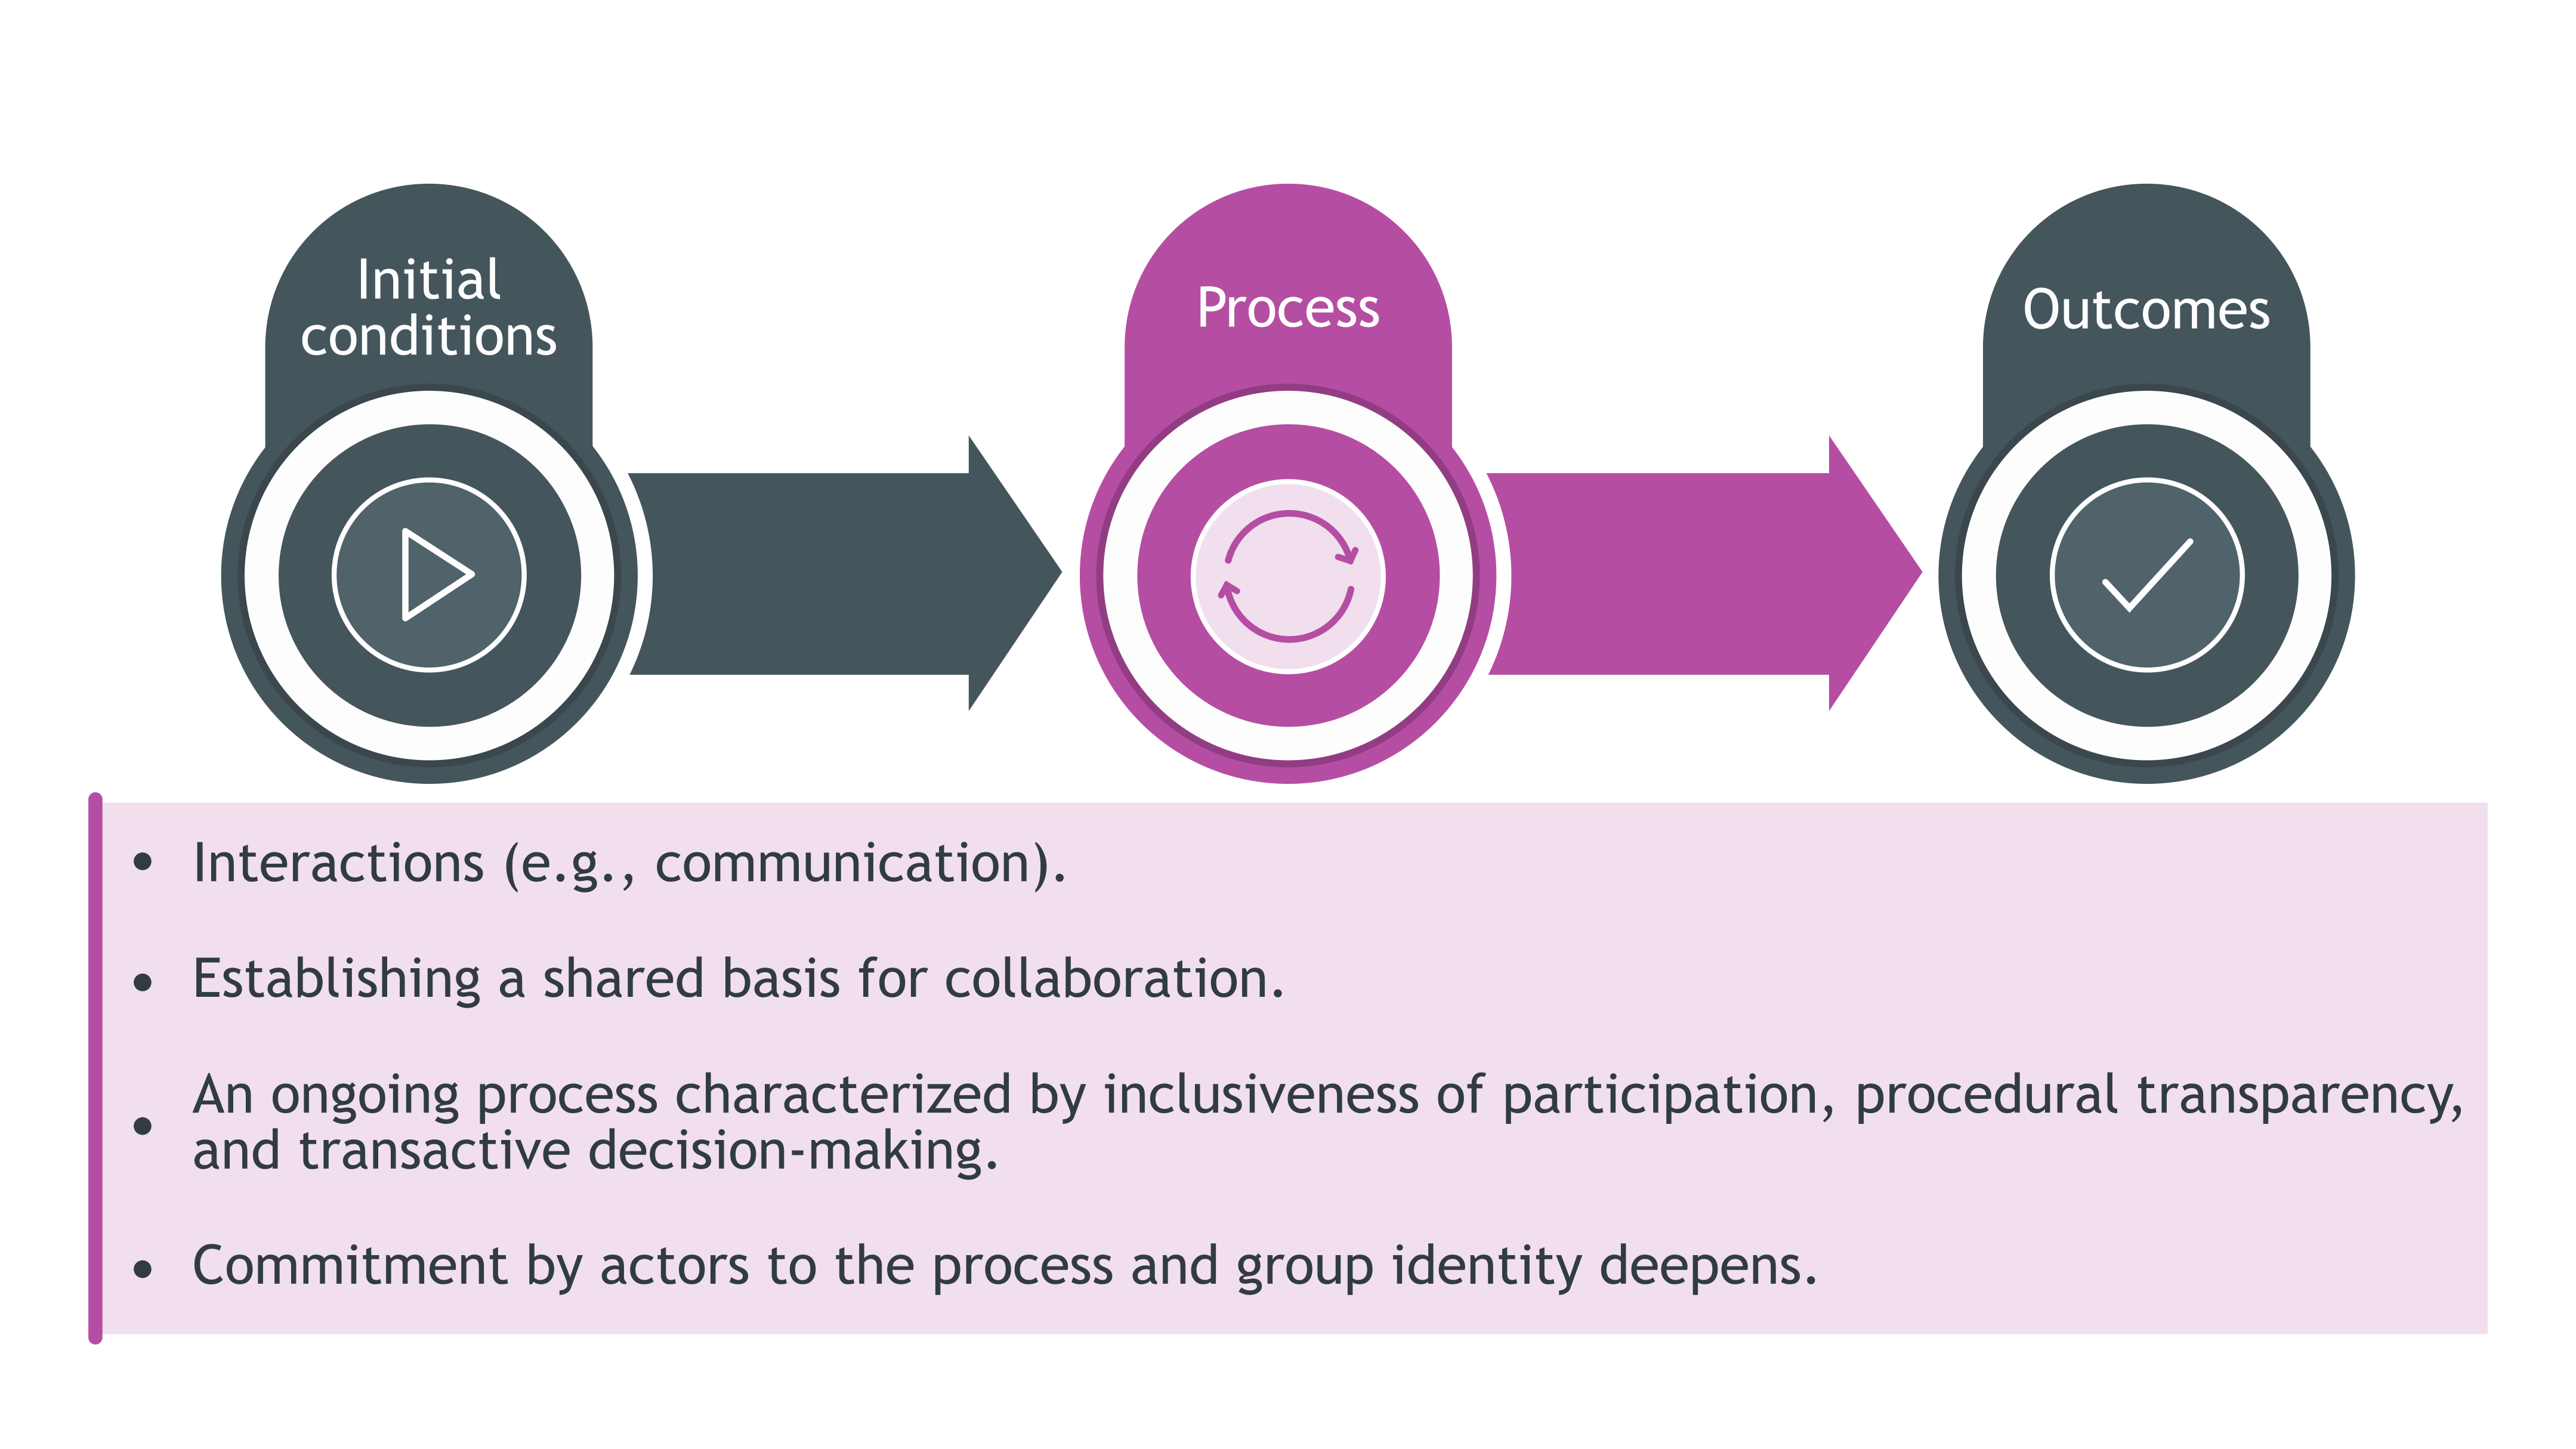 The process of collaboration include: Interactions, Establishing a shared basis for collaboration; An ongoing process characterized by inclusiveness of participation, procedural transparency, and transactive decision-making; Commitment by actors to the process and group identity deepens.